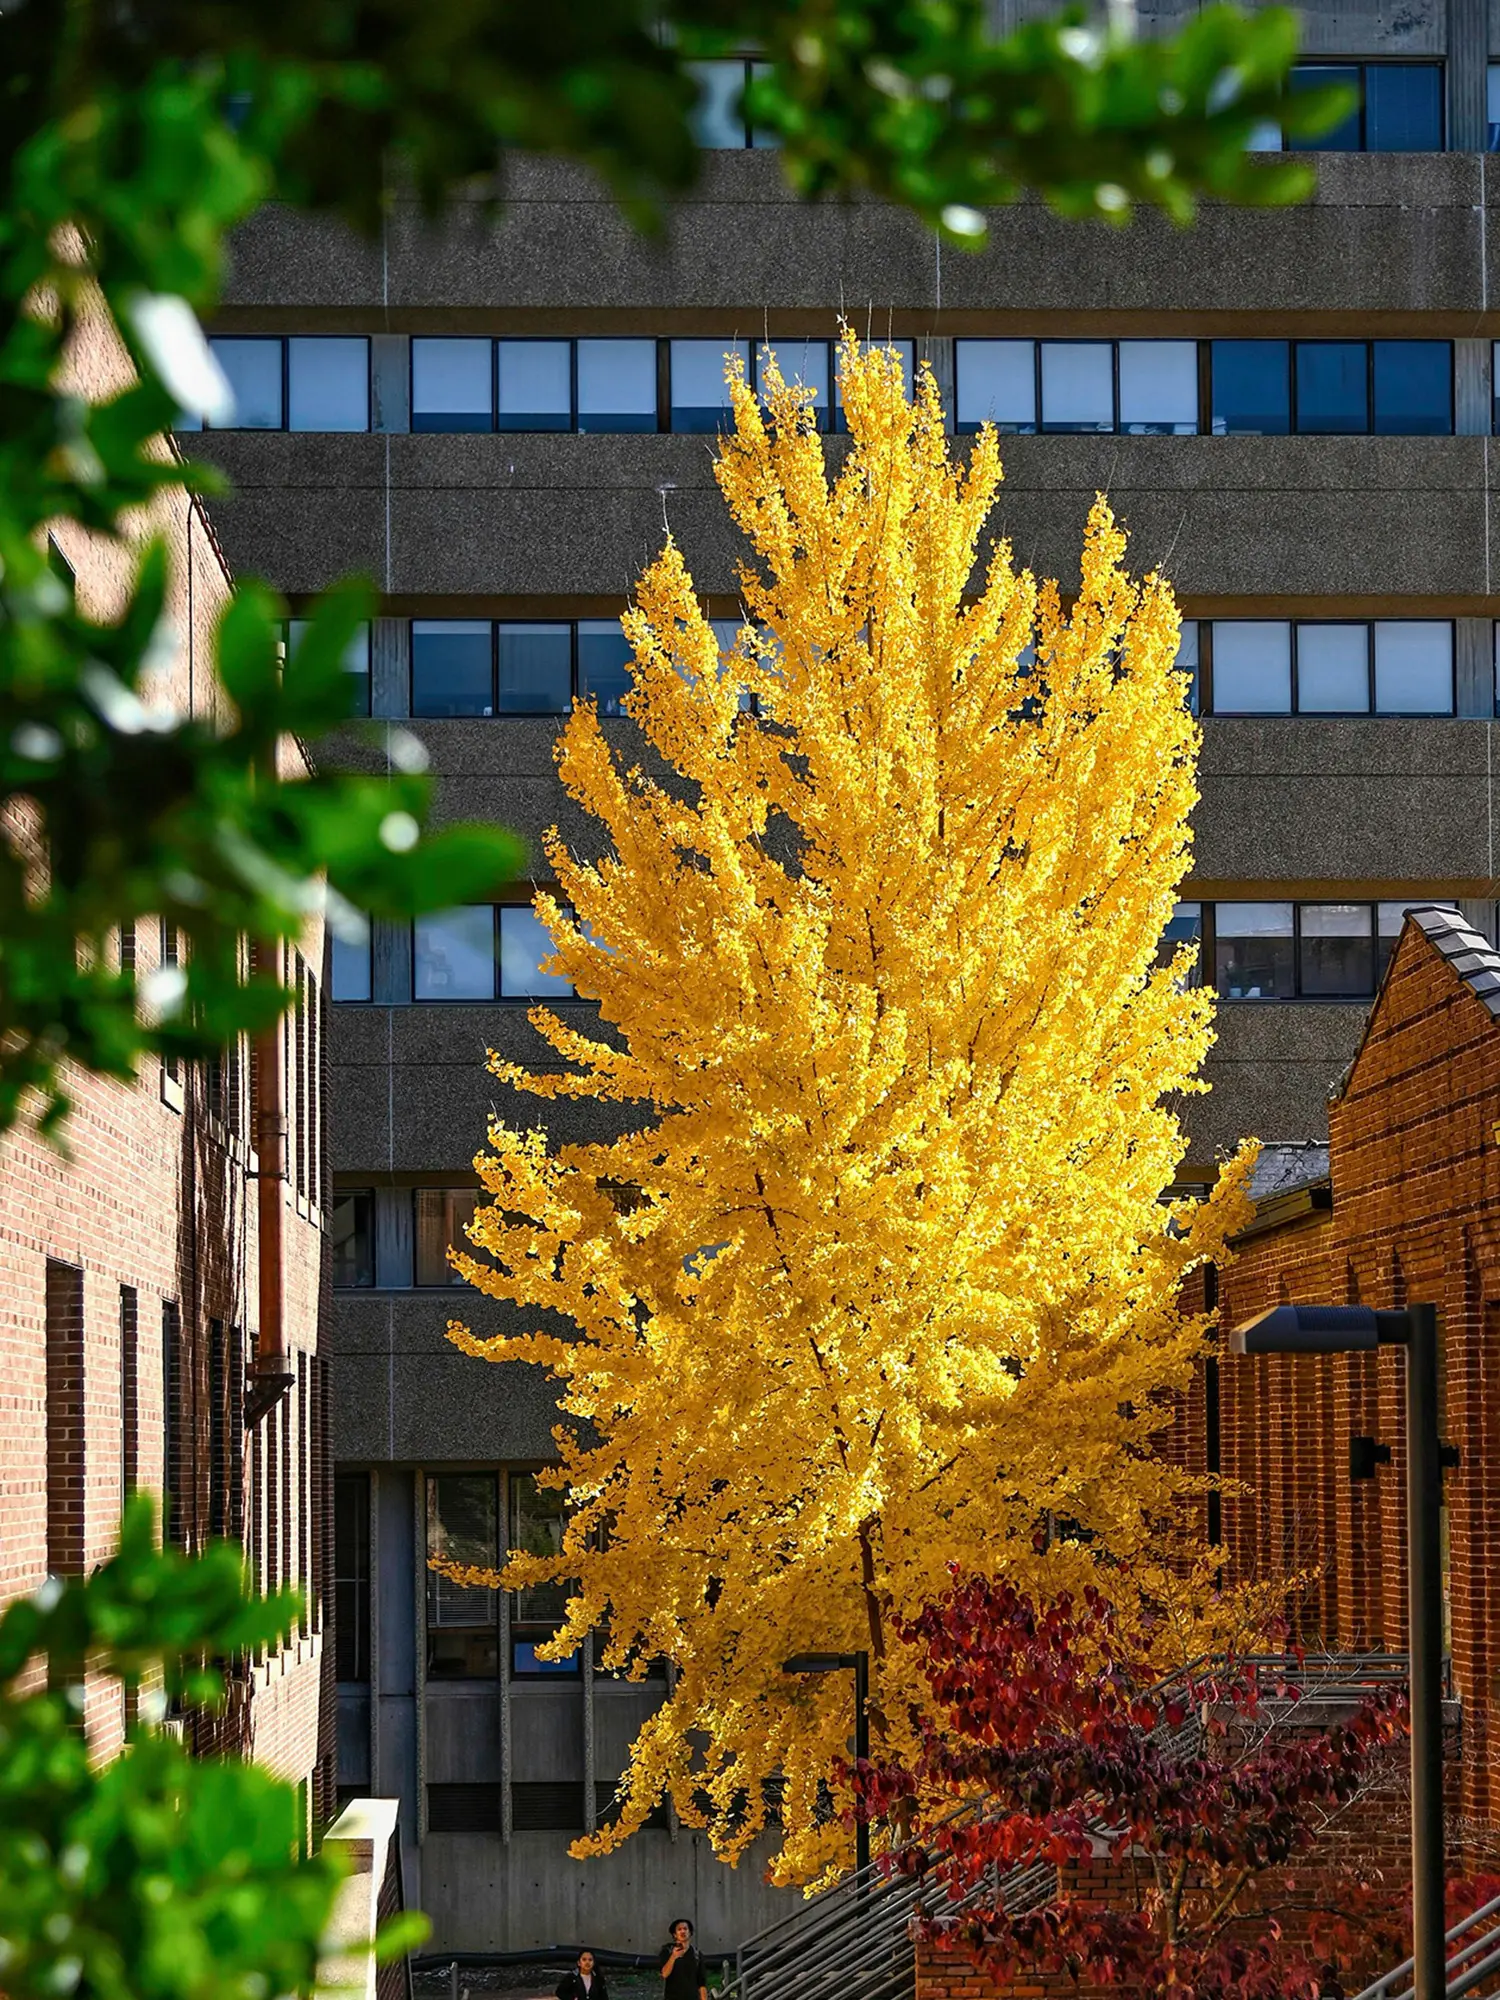 With vibrant yellow leaves, "The Tree" stands out against the brick buildings it surrounds.